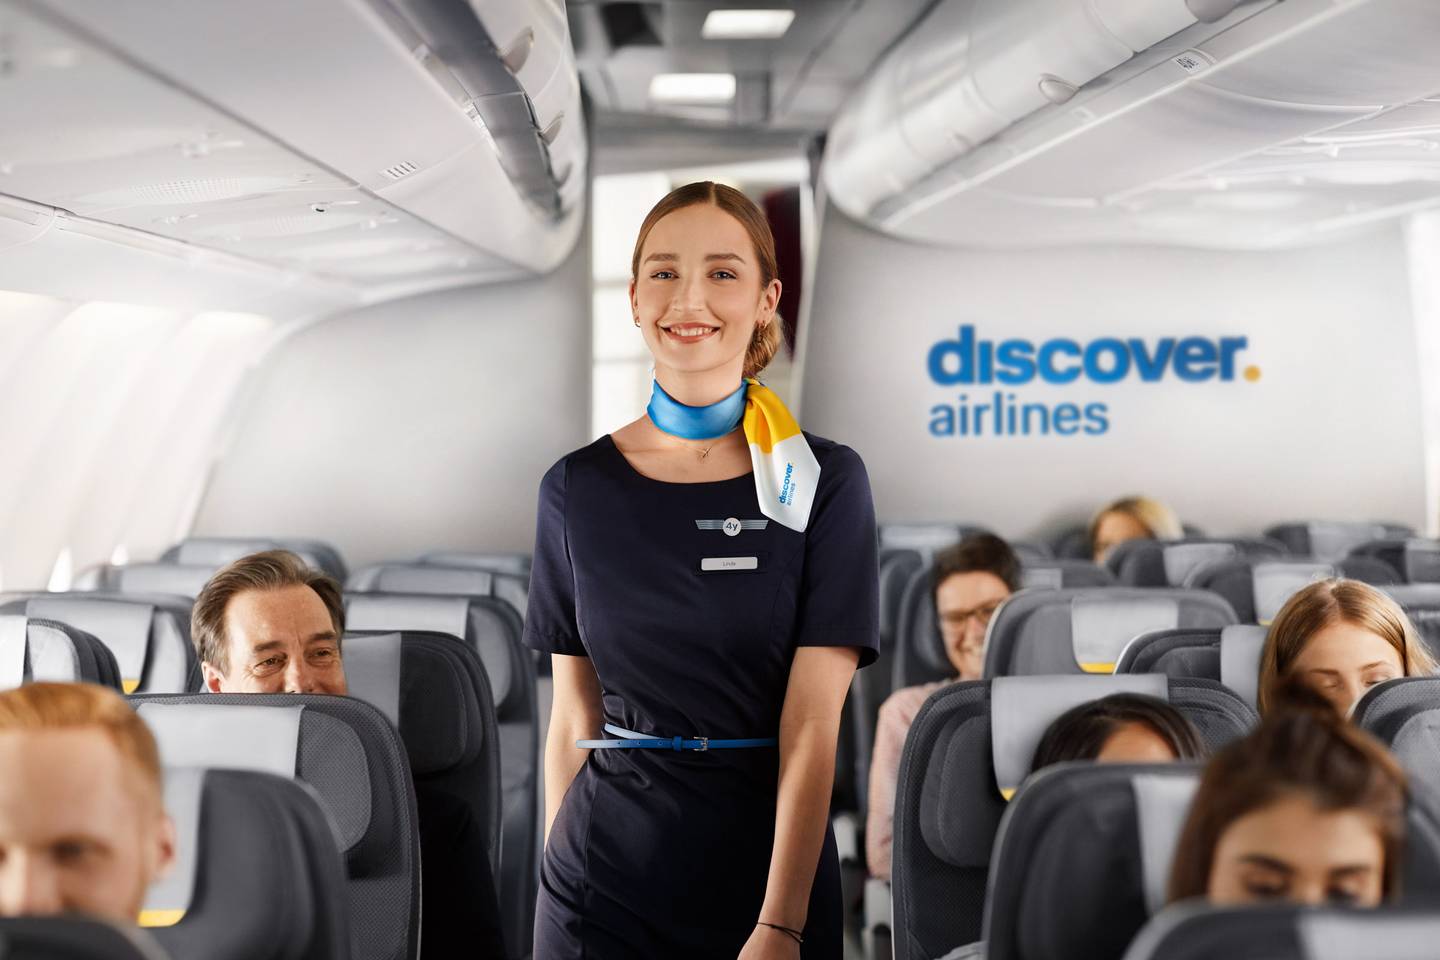 https://www.discover-airlines.com/imgproxy/default-lg/www.discover-airlines.com/en/assets/economy_long_haul/Econonmy_Langstrecke_2400x1600px.jpg